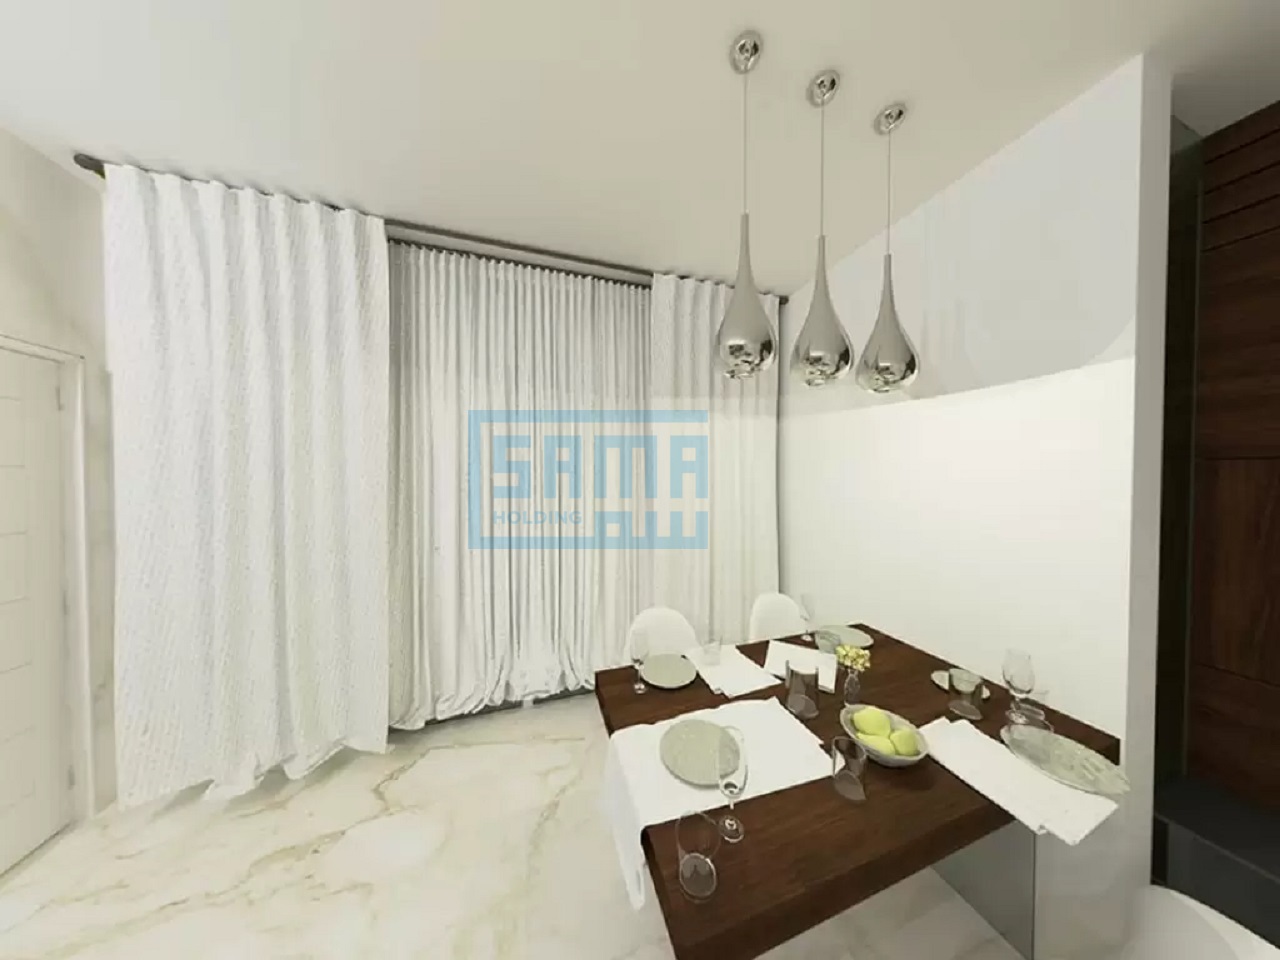 Luxurious 3 Bedrooms plus Roof Residential Unit for Sale in Al Raha Beach under Al Raha Lofts 2 Project, Abu Dhabi